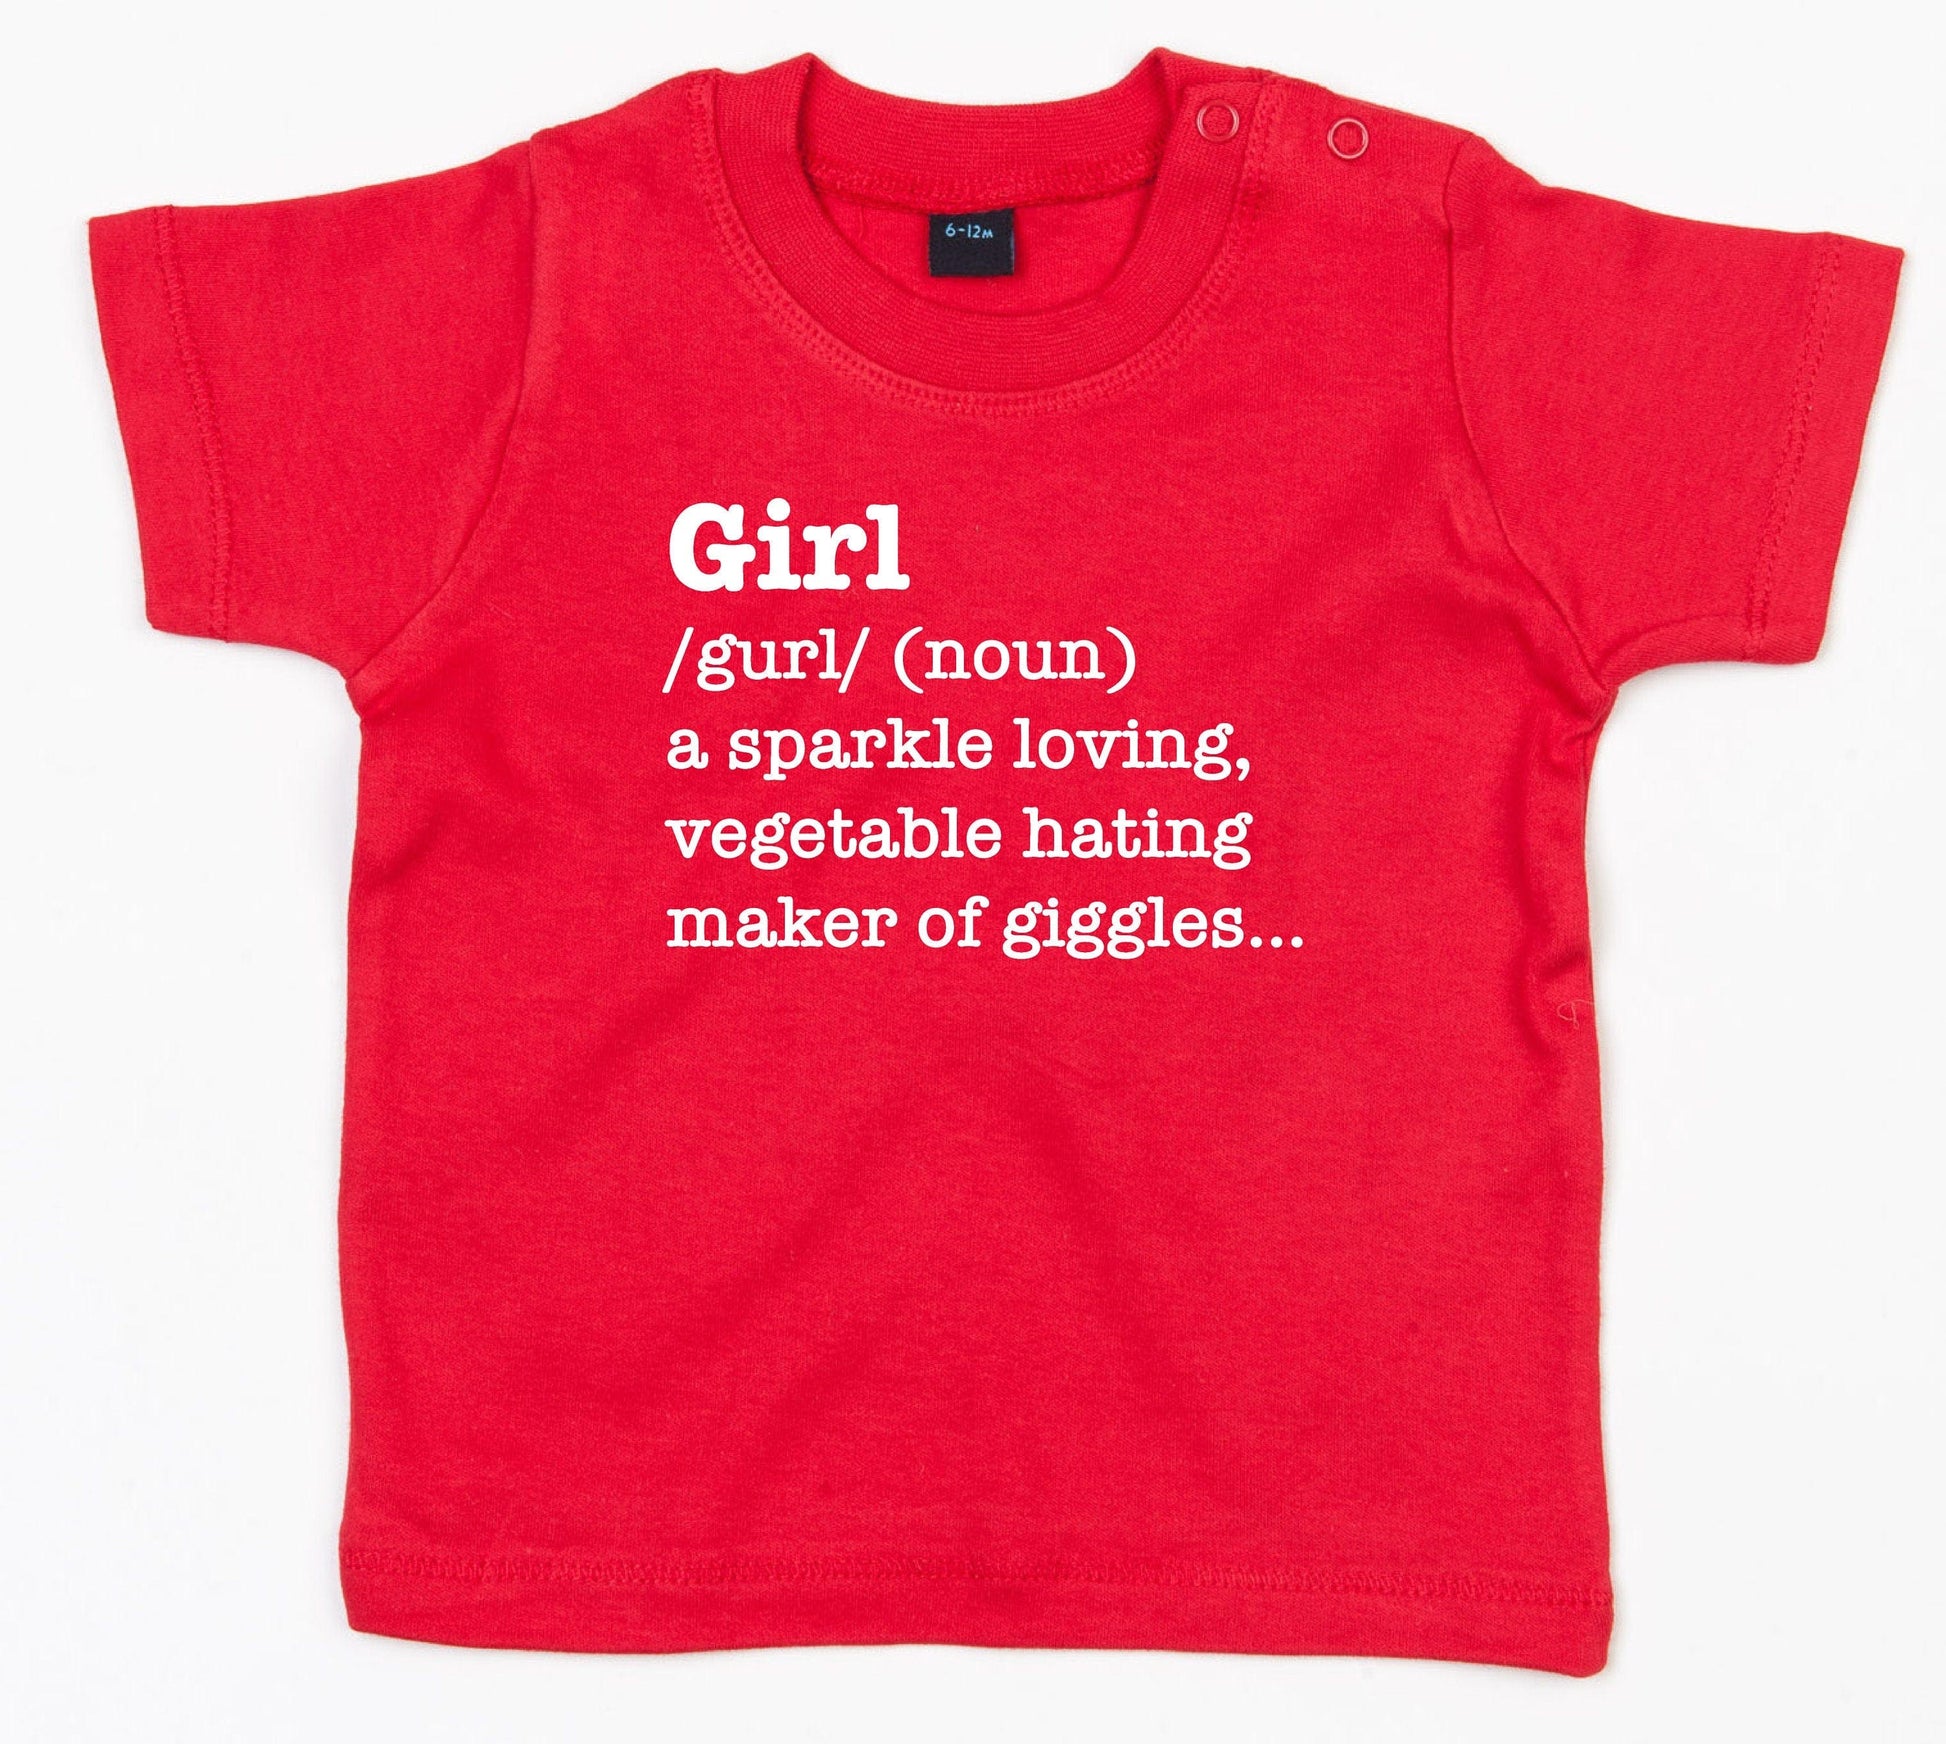 Girl Funny Definition T Shirt, girls tee Gift, cute toddler shirt, one two year old cute kids clothes, sibling t shirt